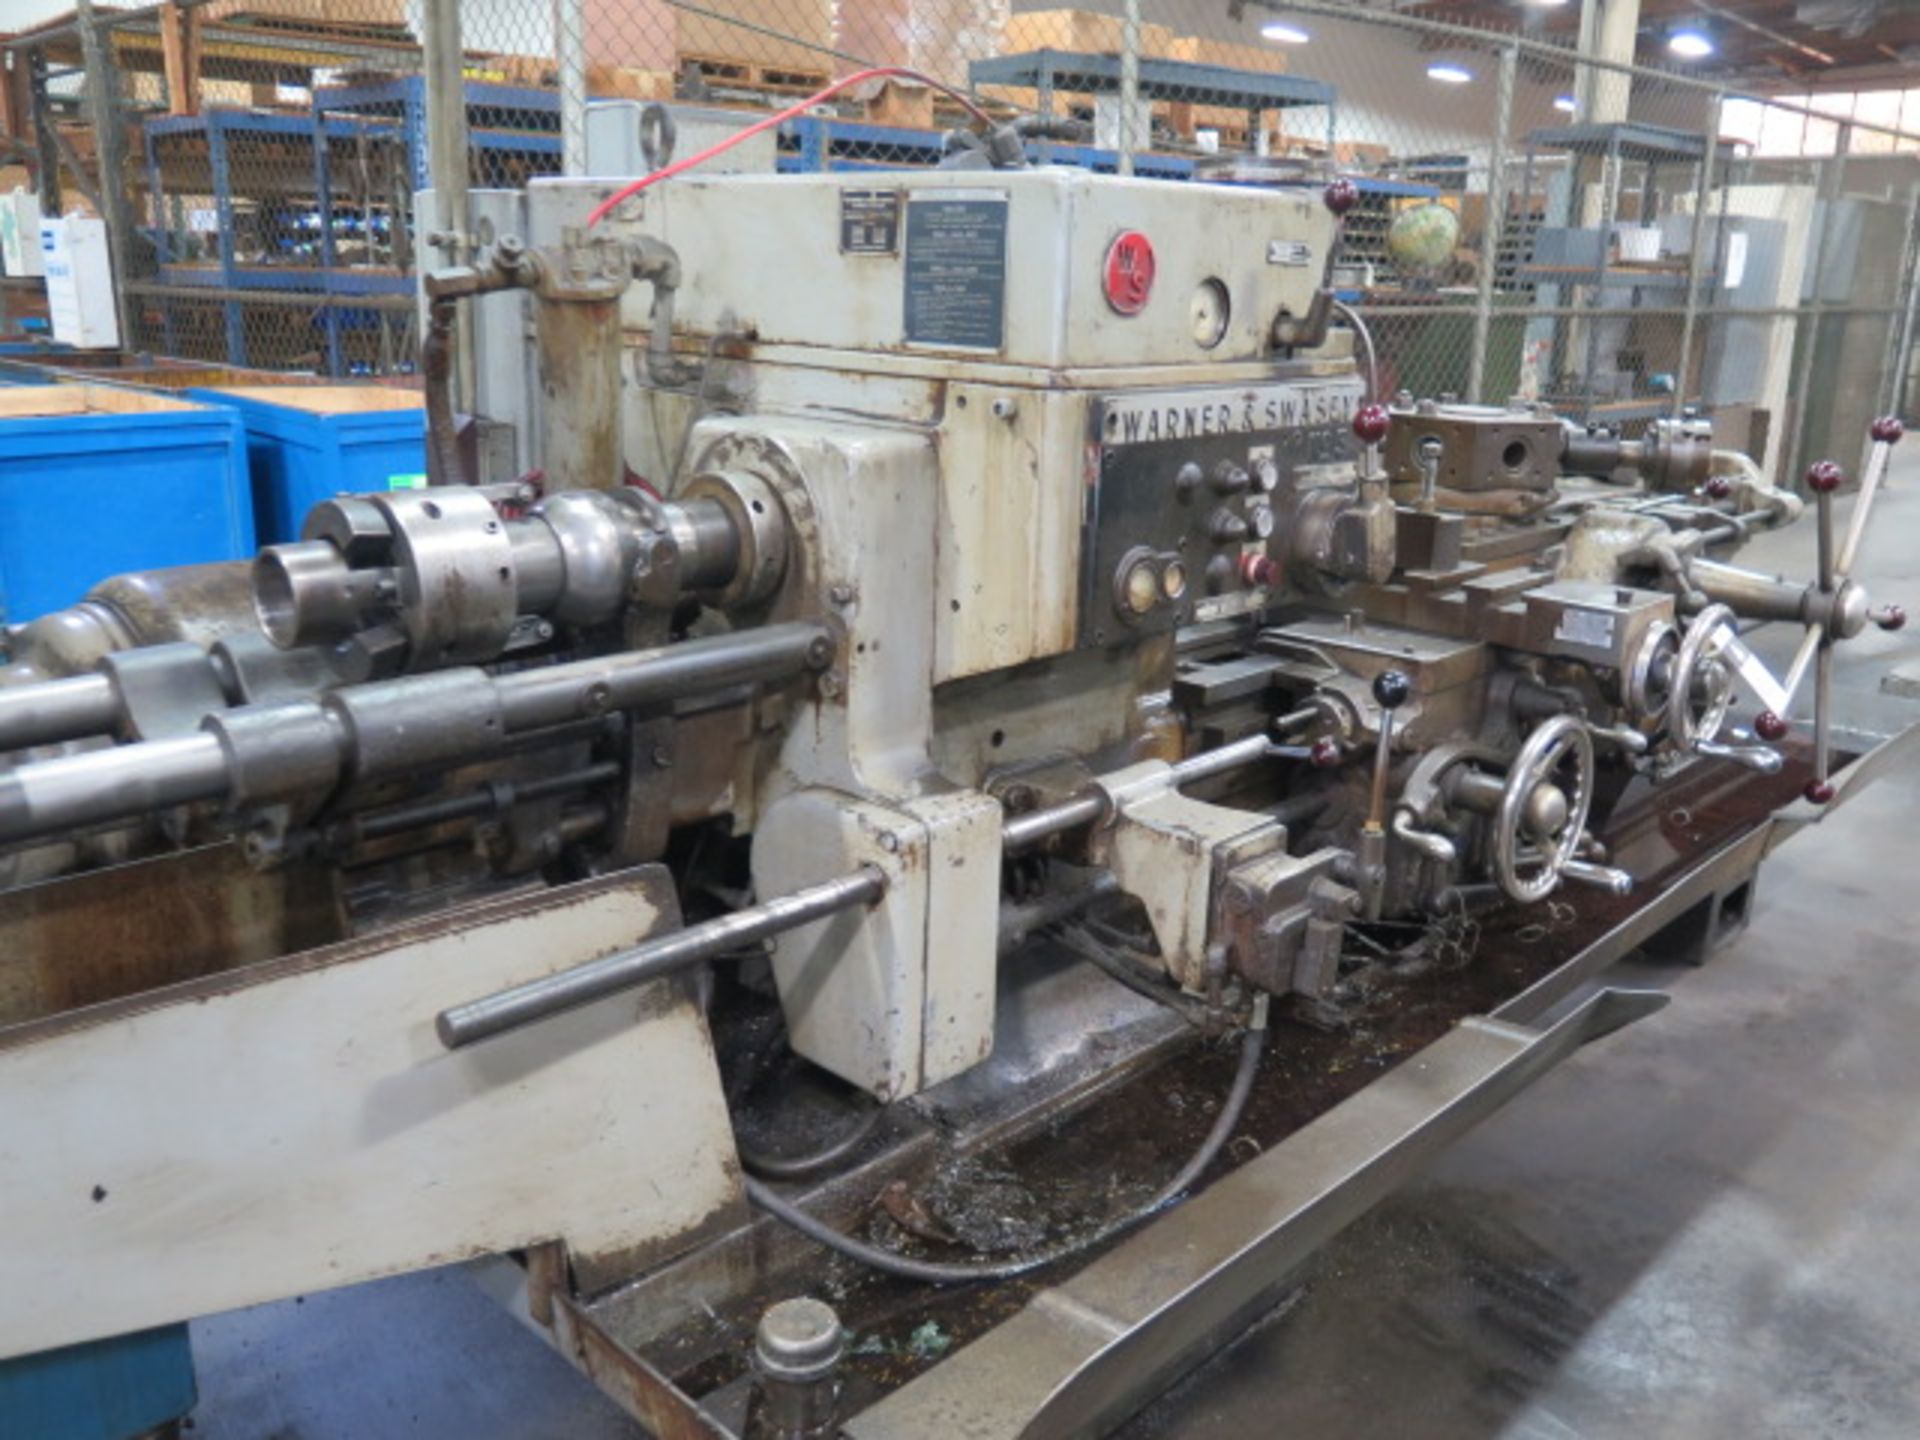 Warner & Swasey No. 5 Turret Lathe s/n 1730290 w/ 25-1553 RPM, 5-Station, Cross Slide, SOLD AS IS - Image 4 of 11